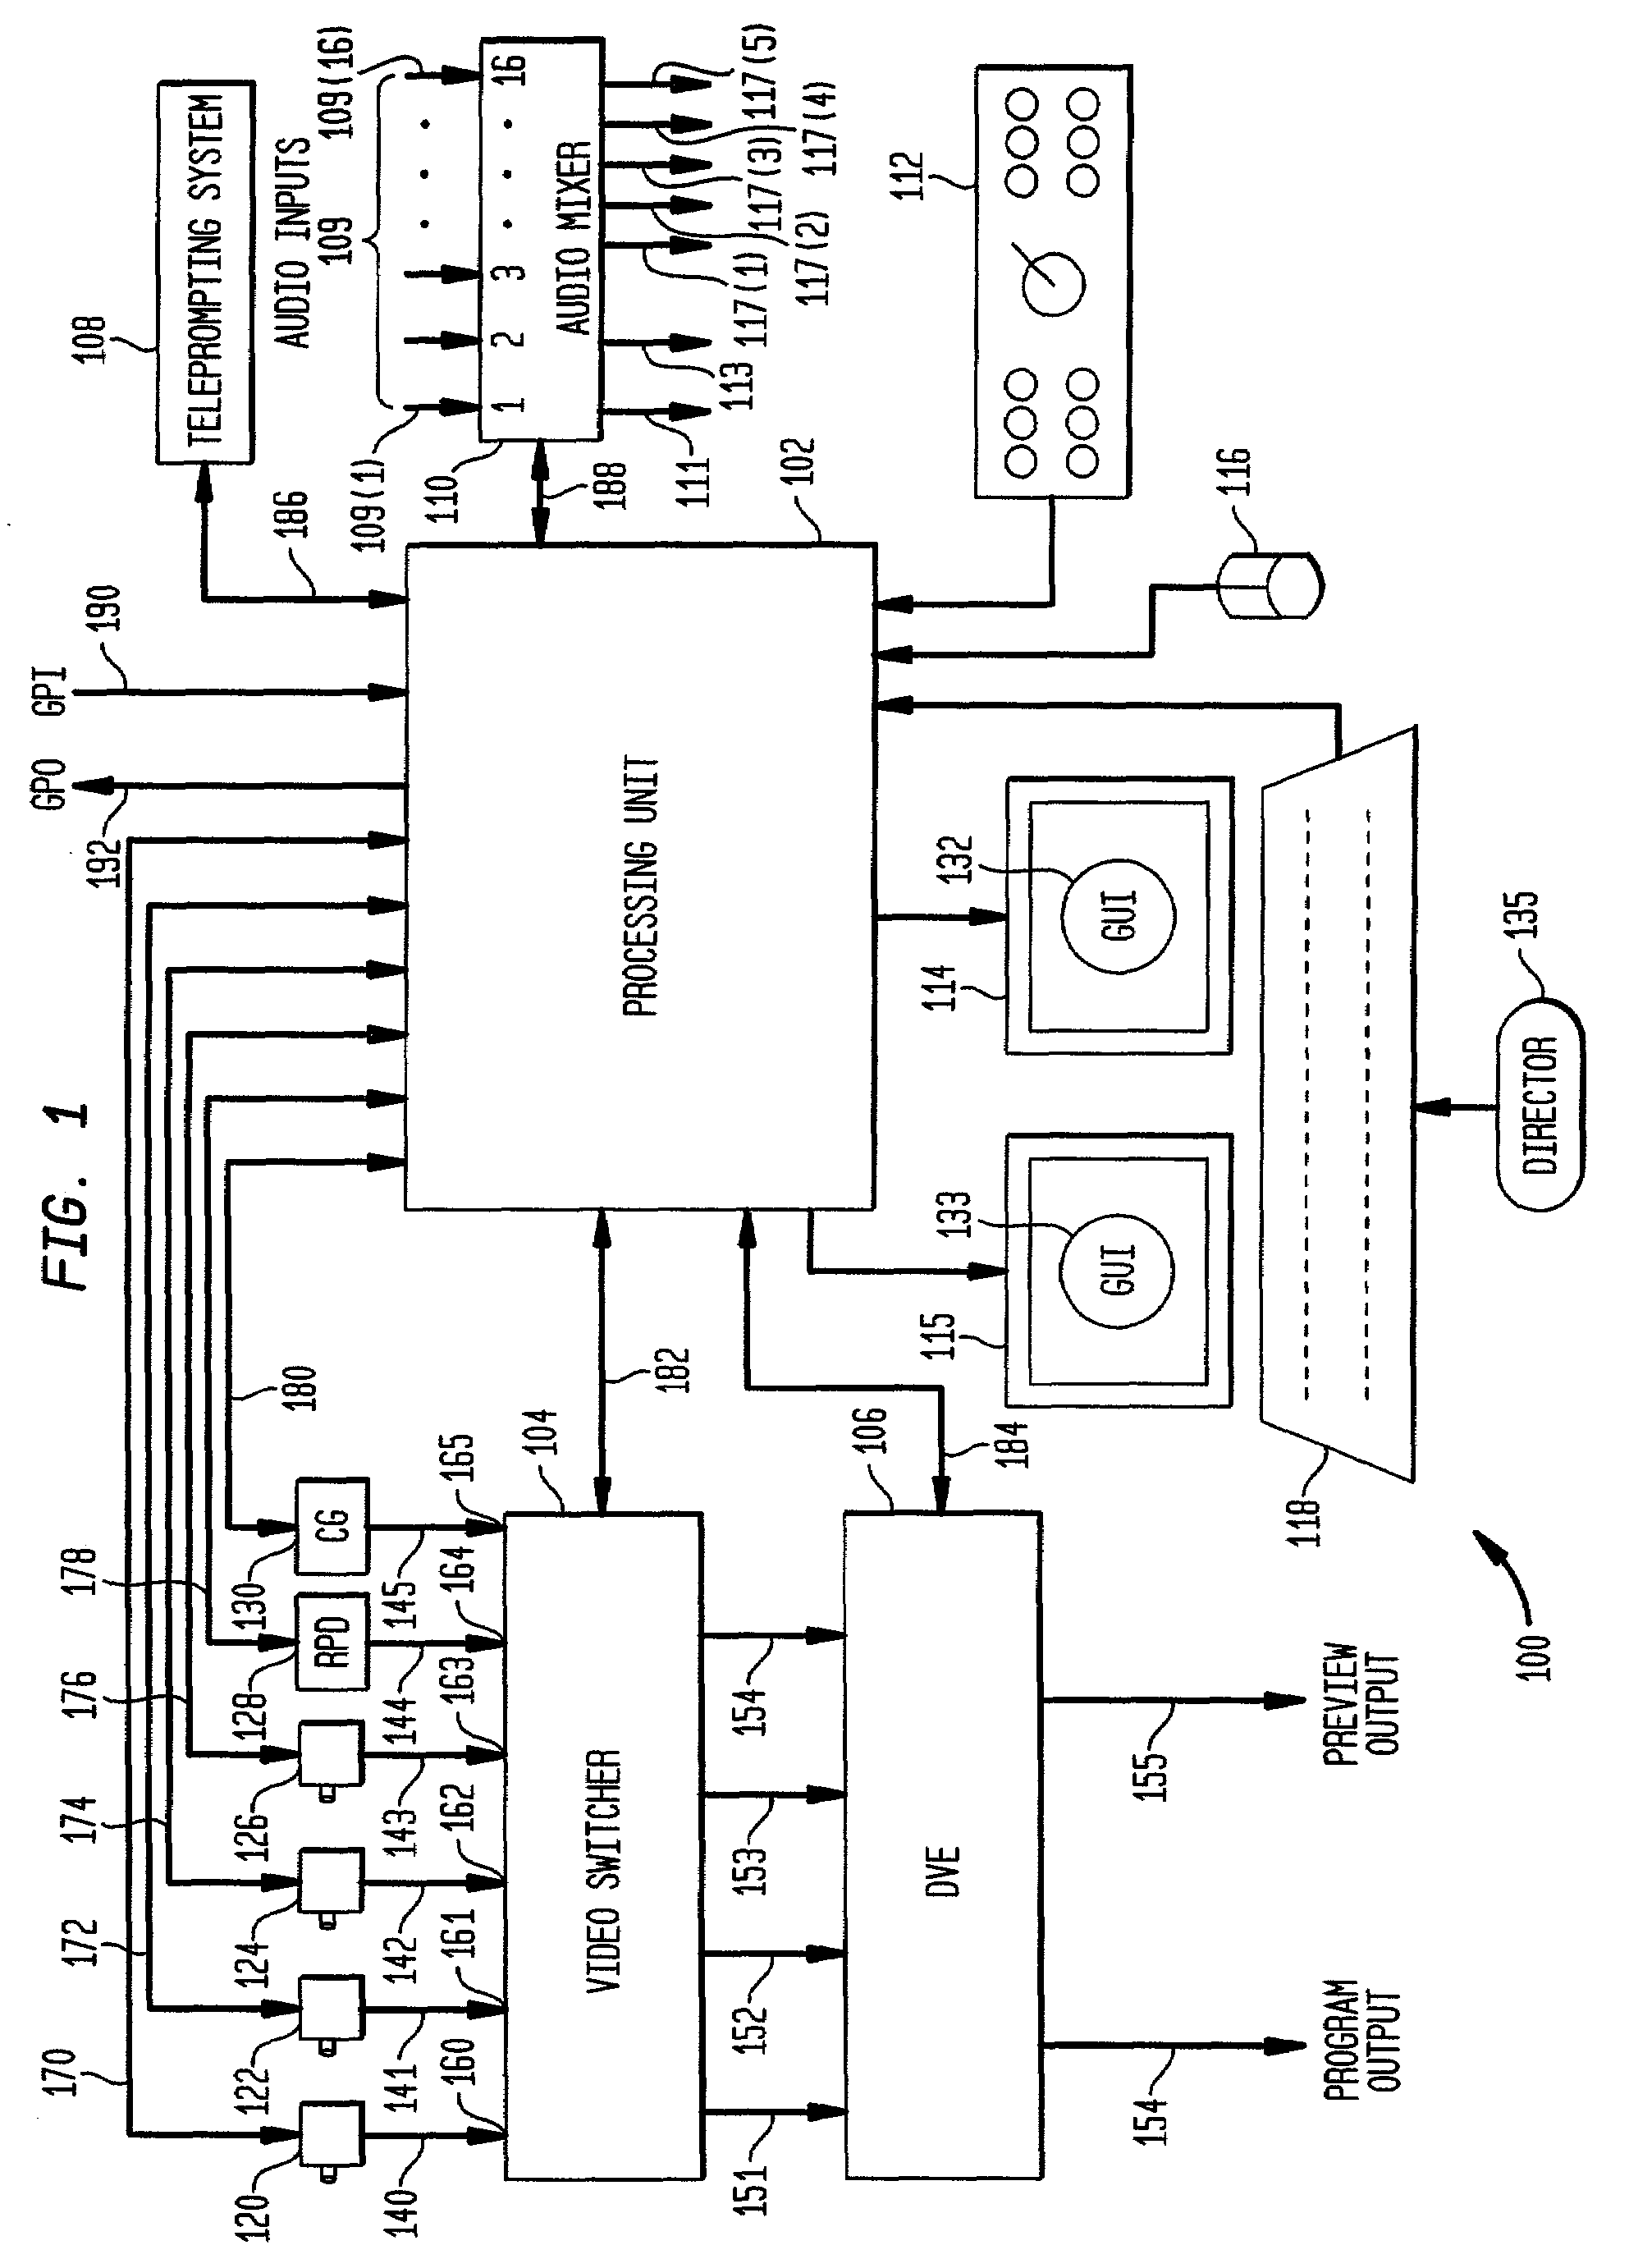 Real time production system and method